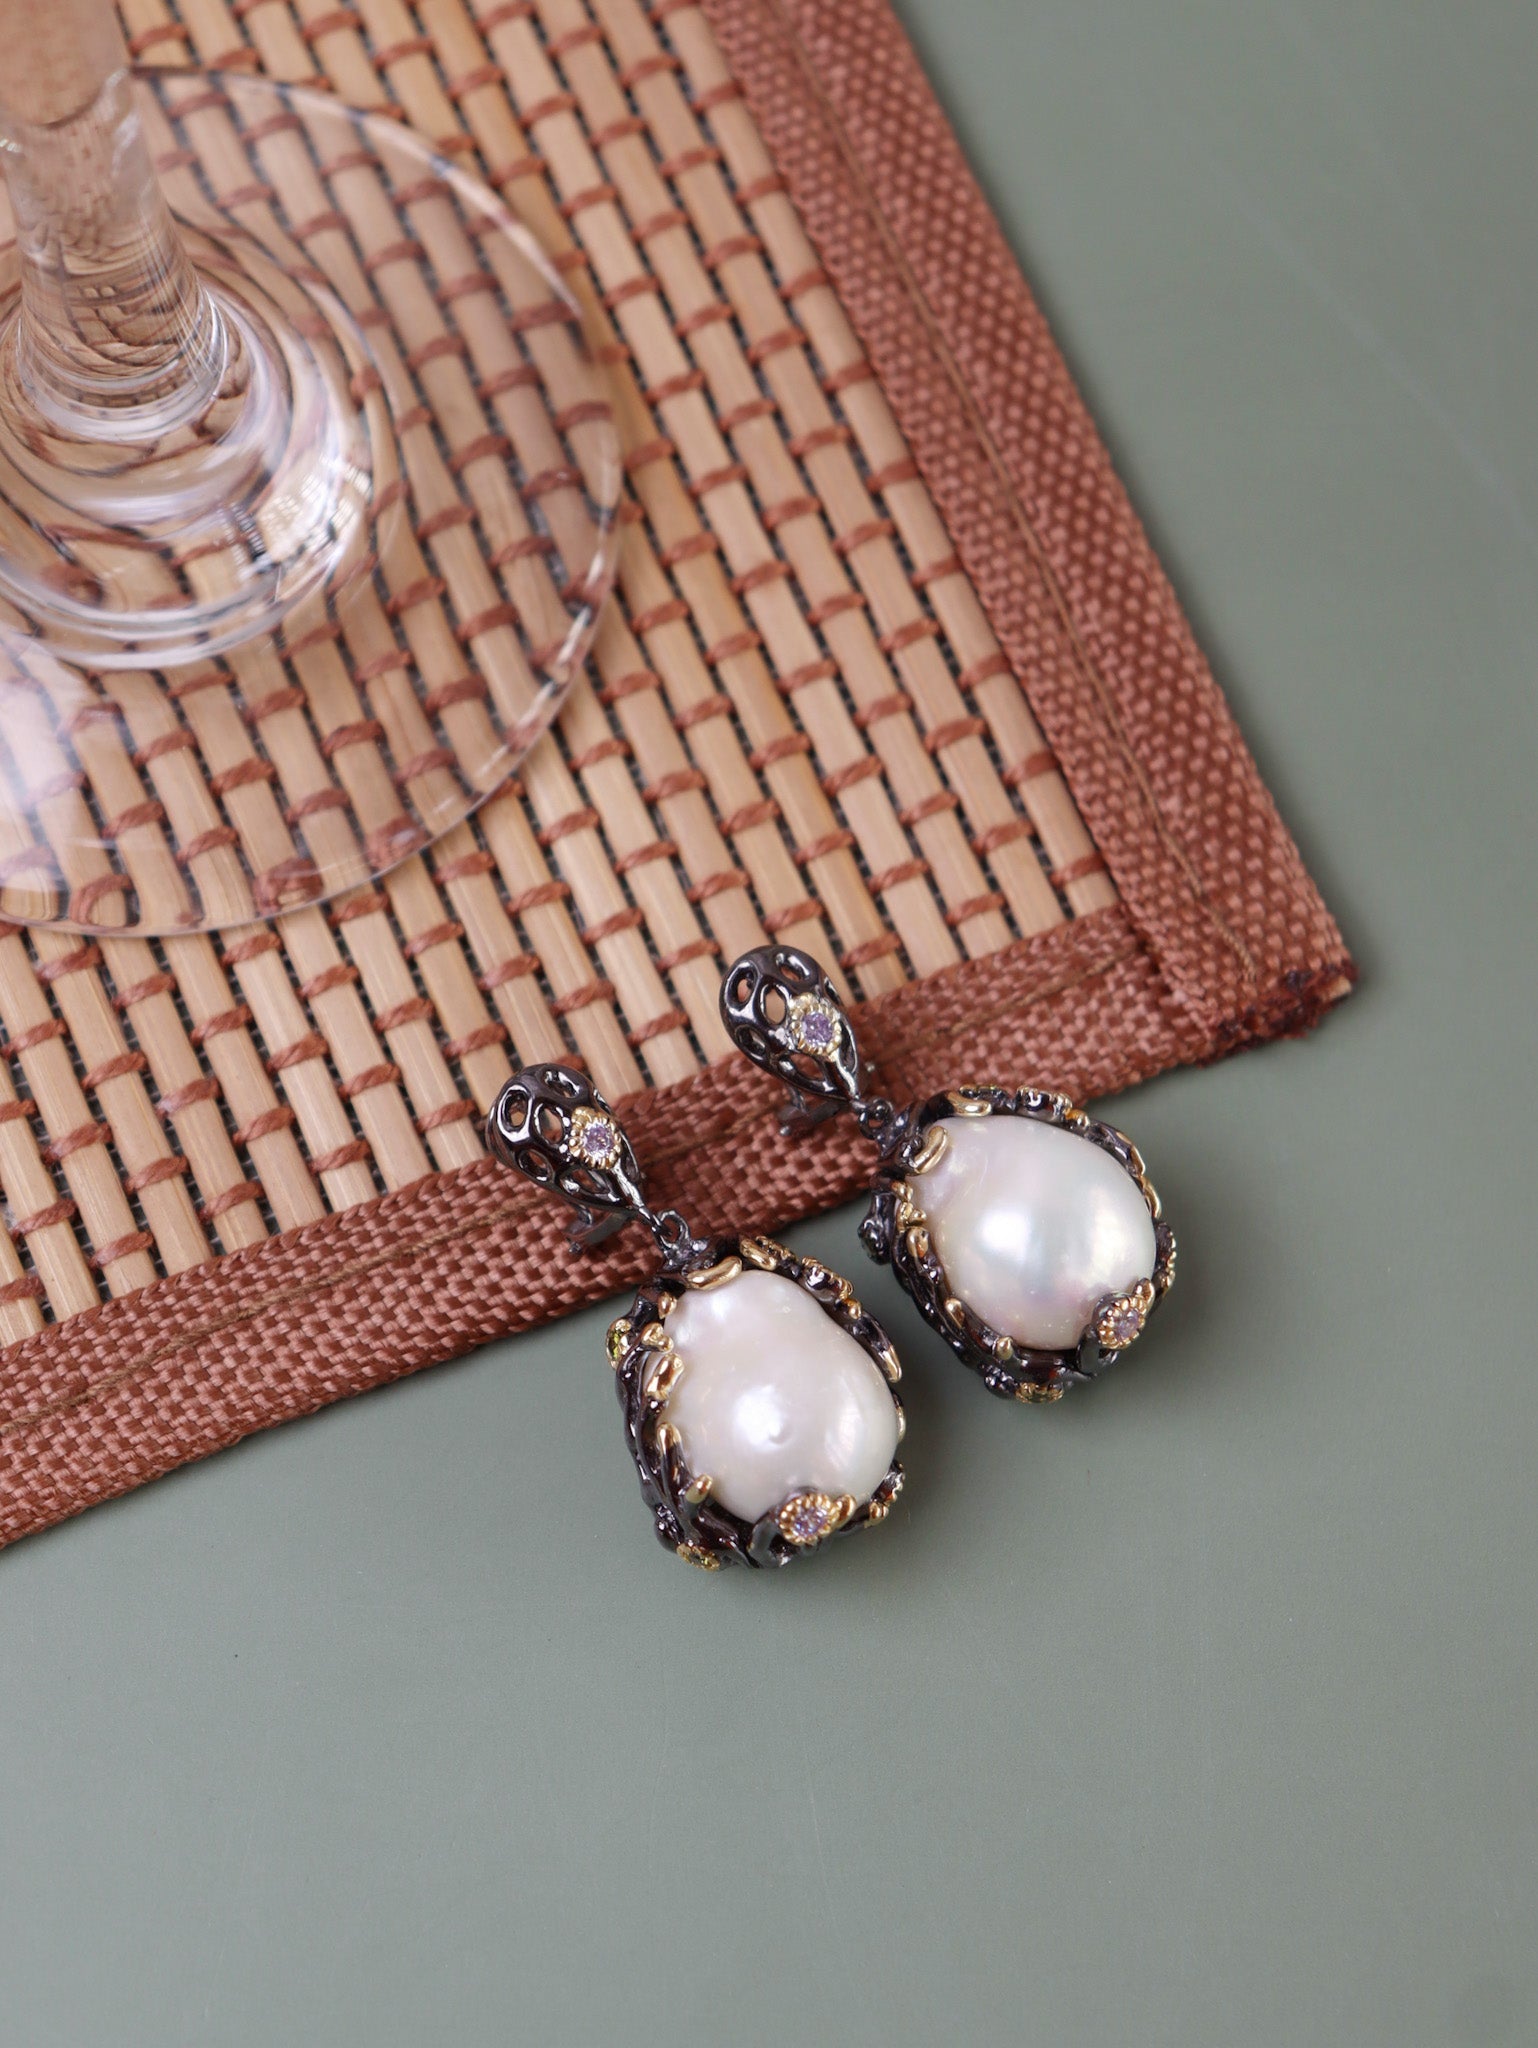 Baroque Pearls And Black Rhodium Pure Silver Earrings 